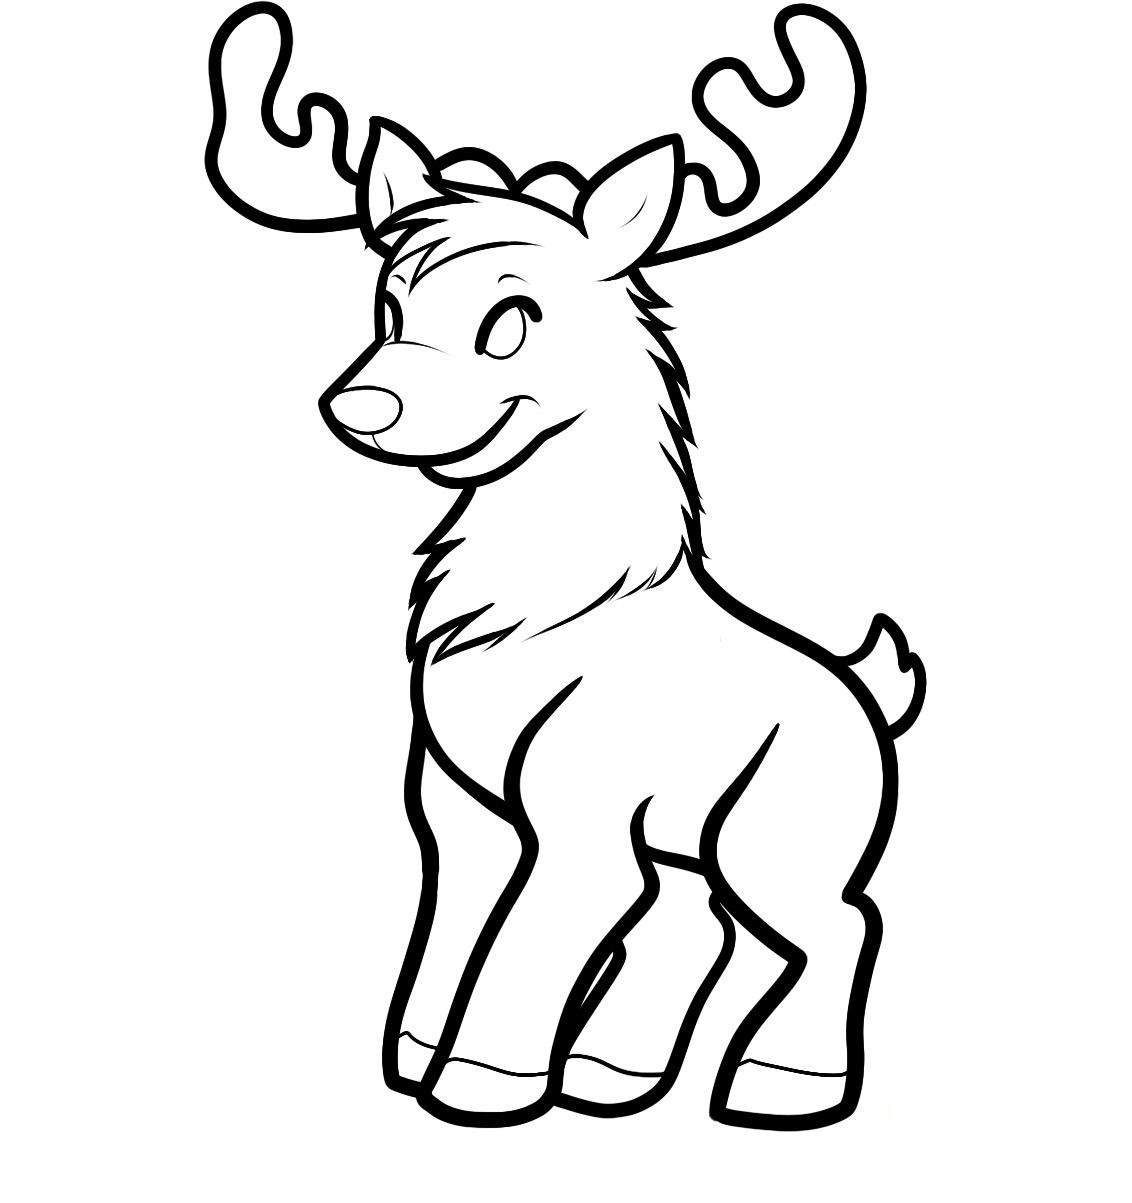 Reindeer Coloring Page for Kids Image - Animal Place